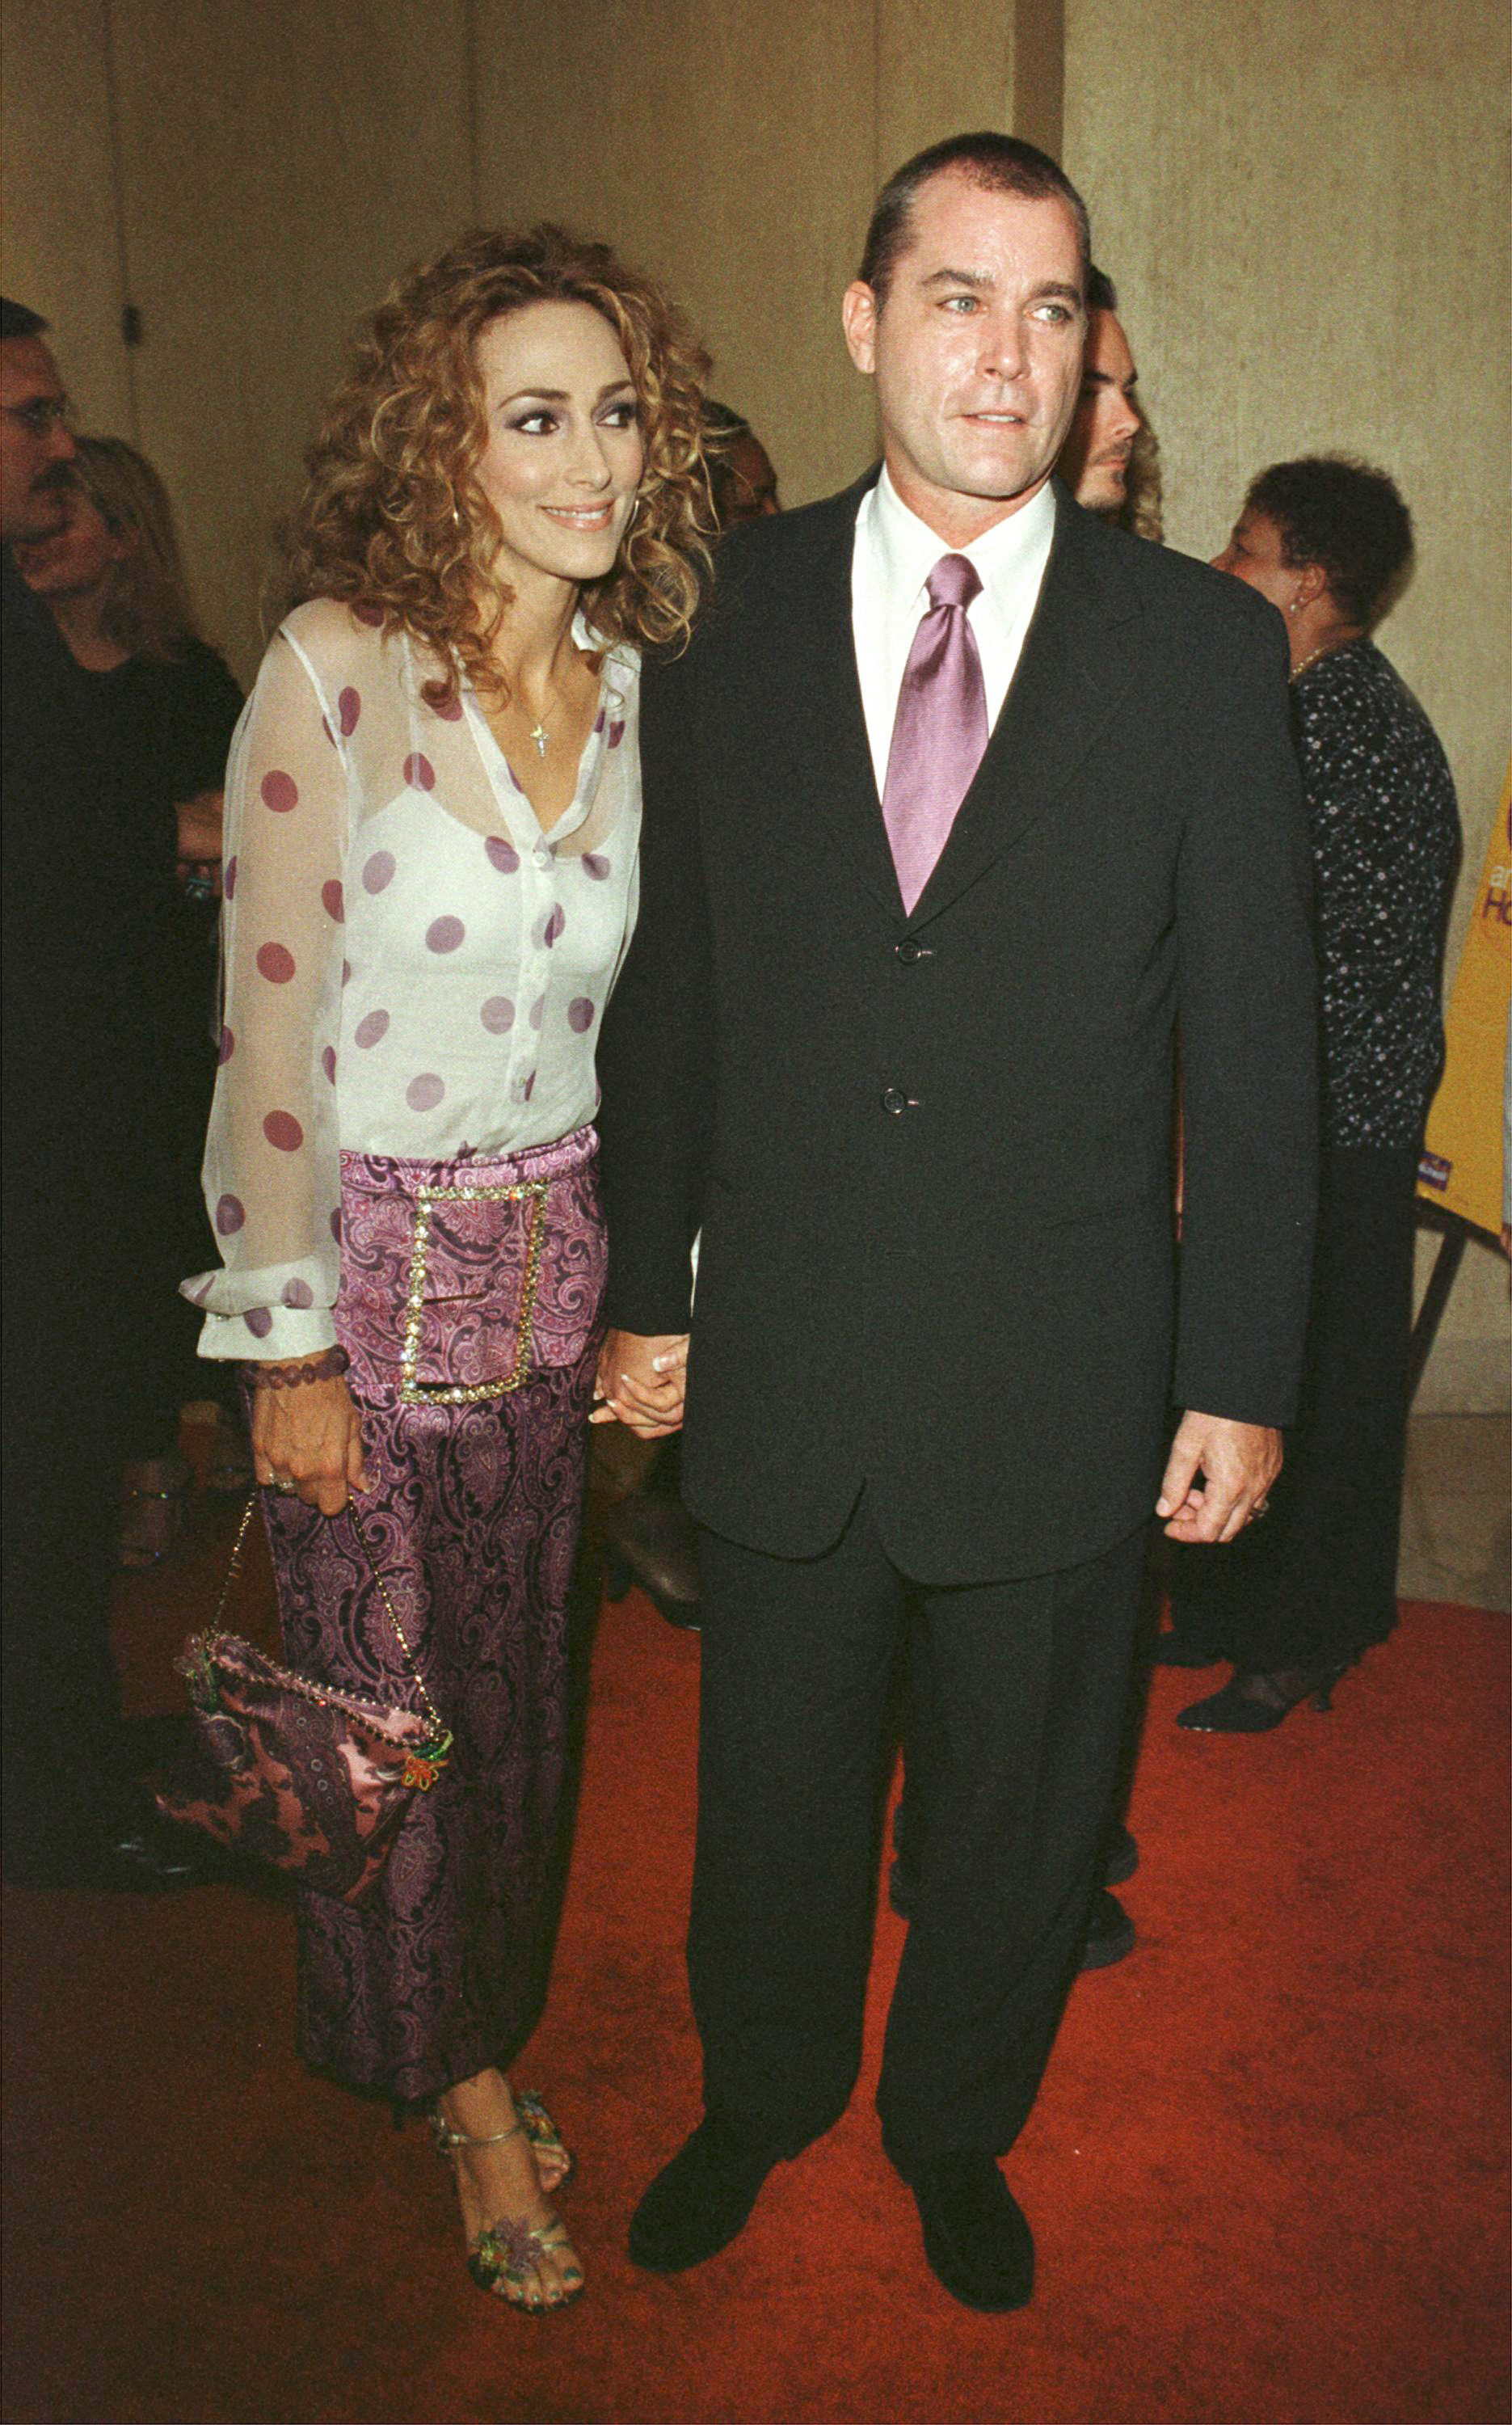 Ray Liotta and Michelle Grace arrive at the 2000 Hollywood Film Awards Gala Ceremony on August 7, 2000 in Beverly Hills. | Source: Getty Images